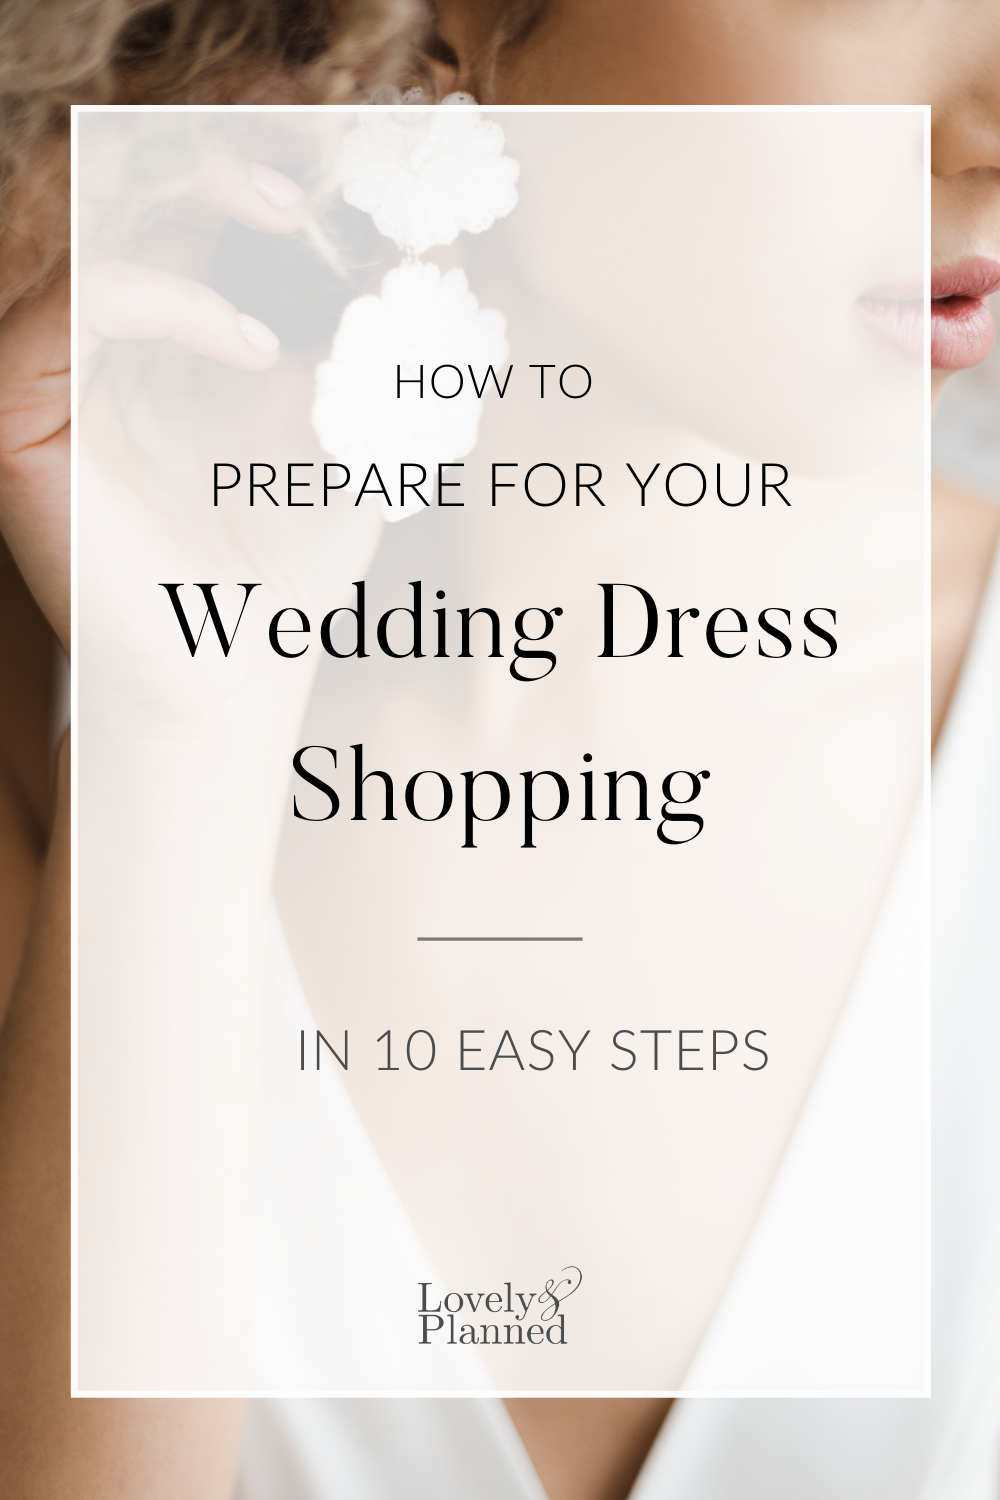 How to Prepare for Your Wedding Dress Shopping - Lovely & Planned